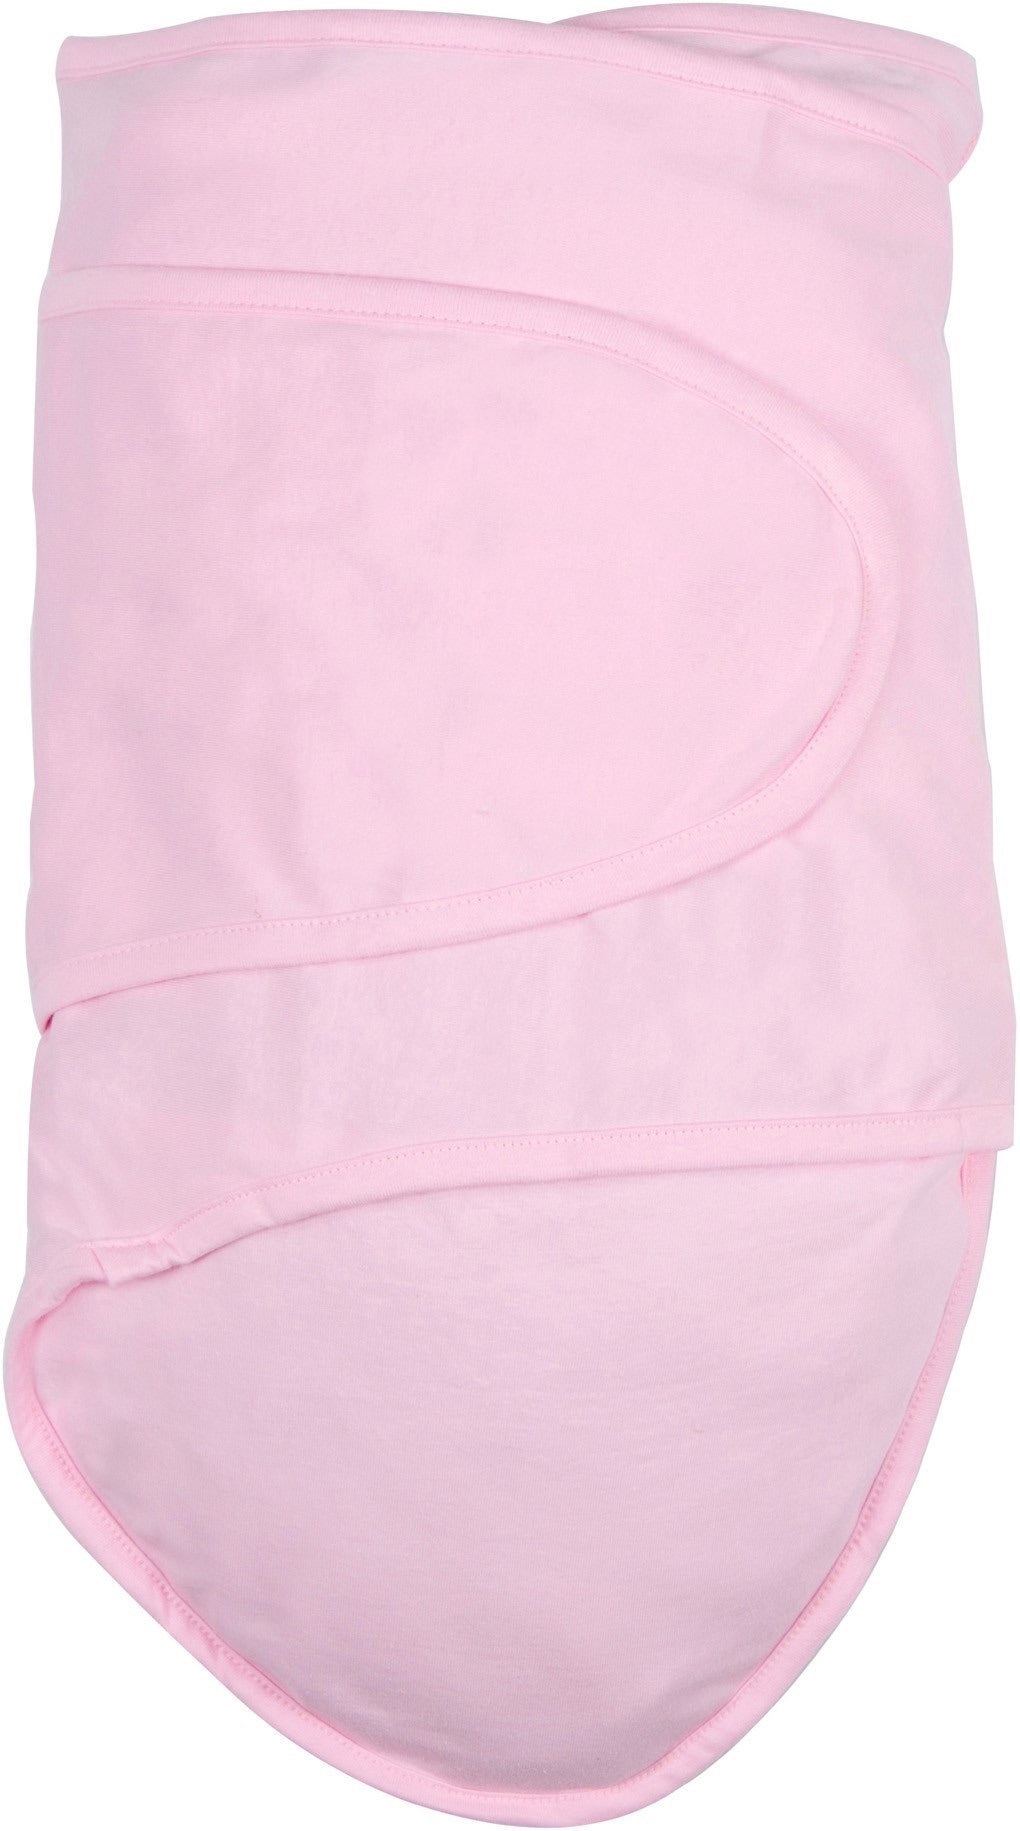 Pink The Miracle Blanket® makes it easy to get the perfect swaddle every time!  The fabric is a super soft cotton knit selected for several good reasons: It’s breathable so that it can be used in warm climates while still being luxurious enough to keep your baby warm in cooler places; It has just enough stretch to absorb your baby’s movements without coming undone but it’s not so stretchy that it won’t stay tight.   